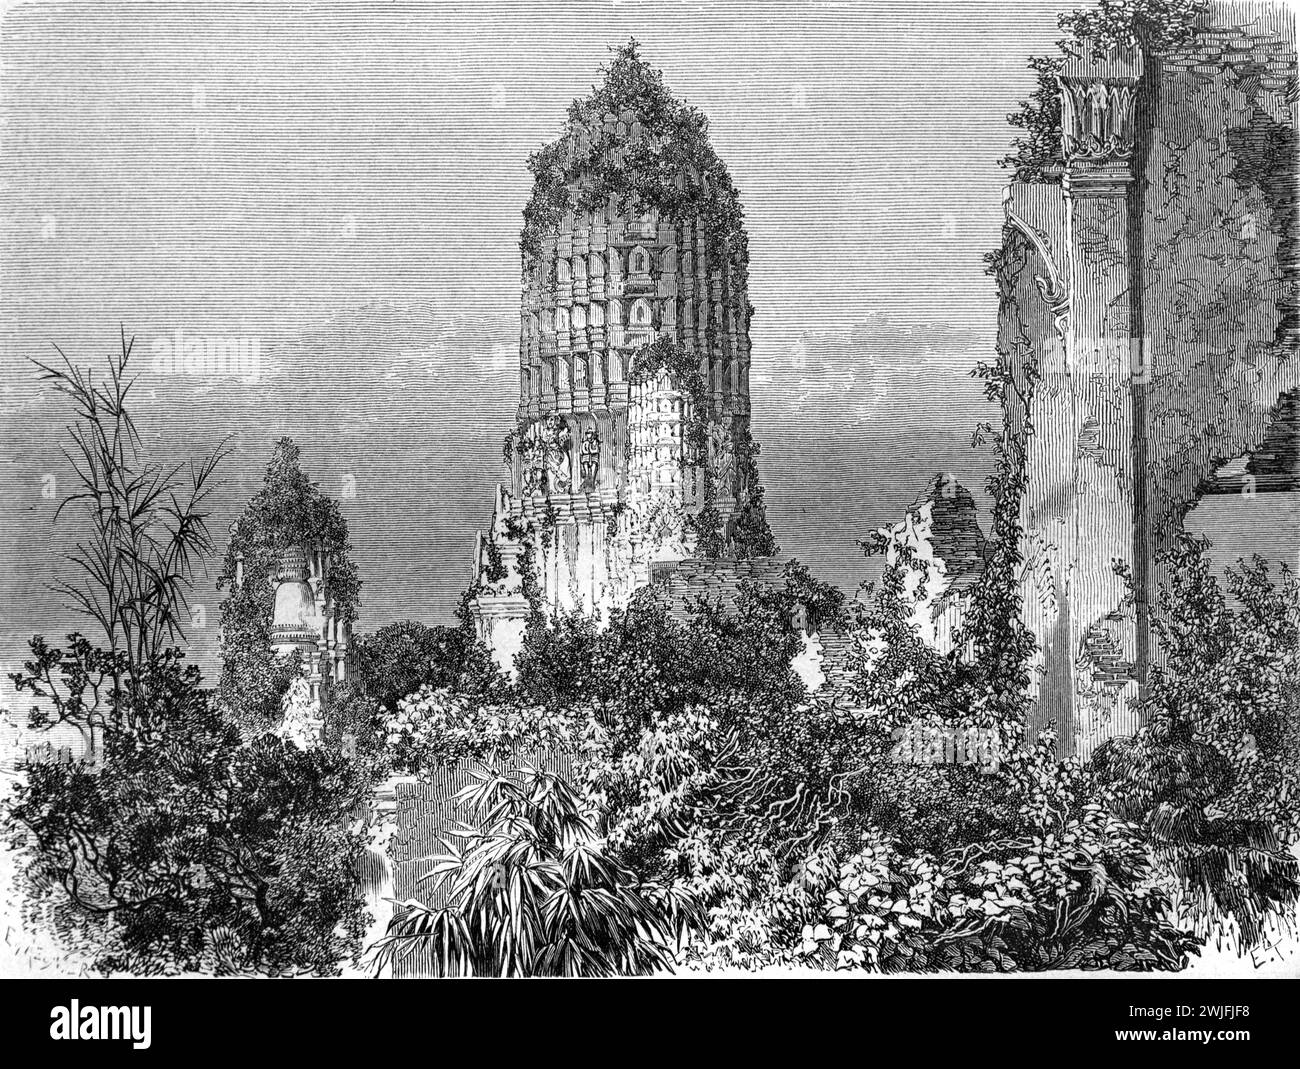 Overground Ruins Covered with Creepers & Ivy of Wat Temple (before Restoration) at Ayutthaya Historical Park Thailand. Vintage or Historical Engraving or Illustration 1863 Stock Photo